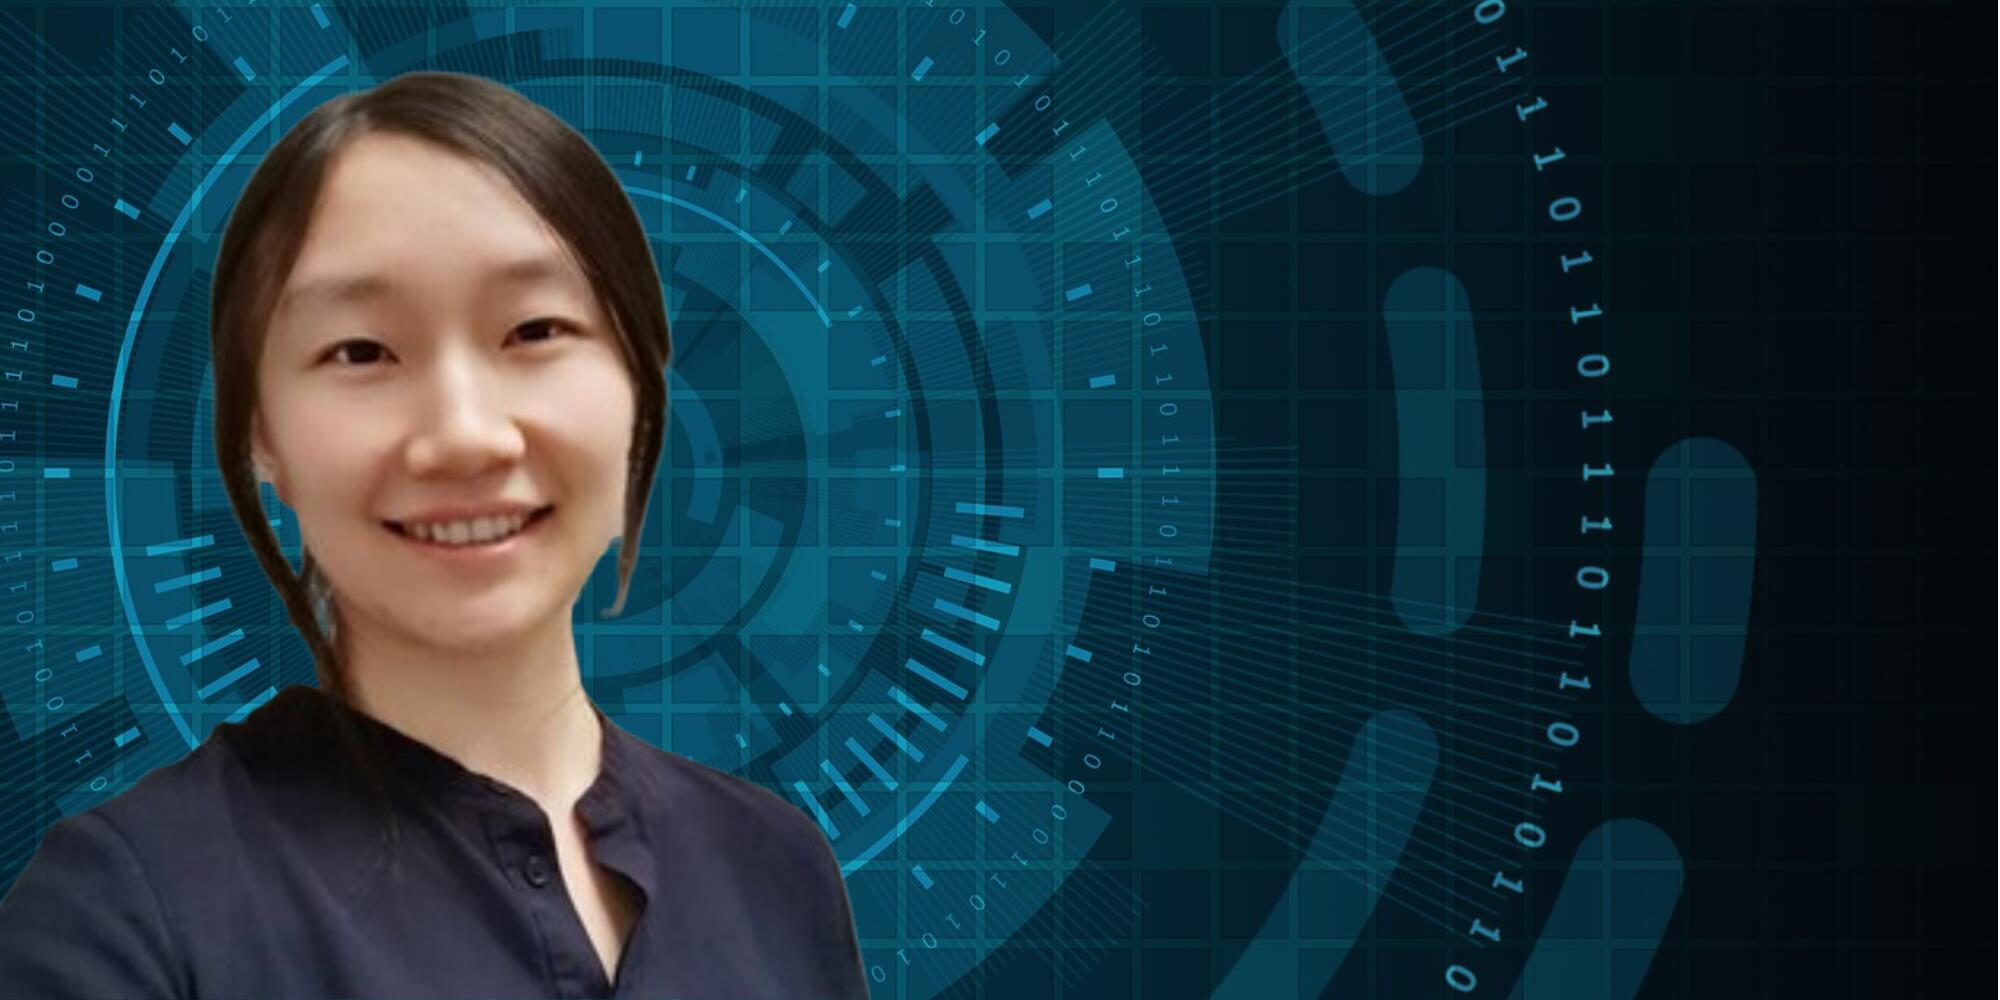 Dr. Zhang on left side of image wearing a blue blouse and dark blue background of concentric circles of differing styles and numbers.